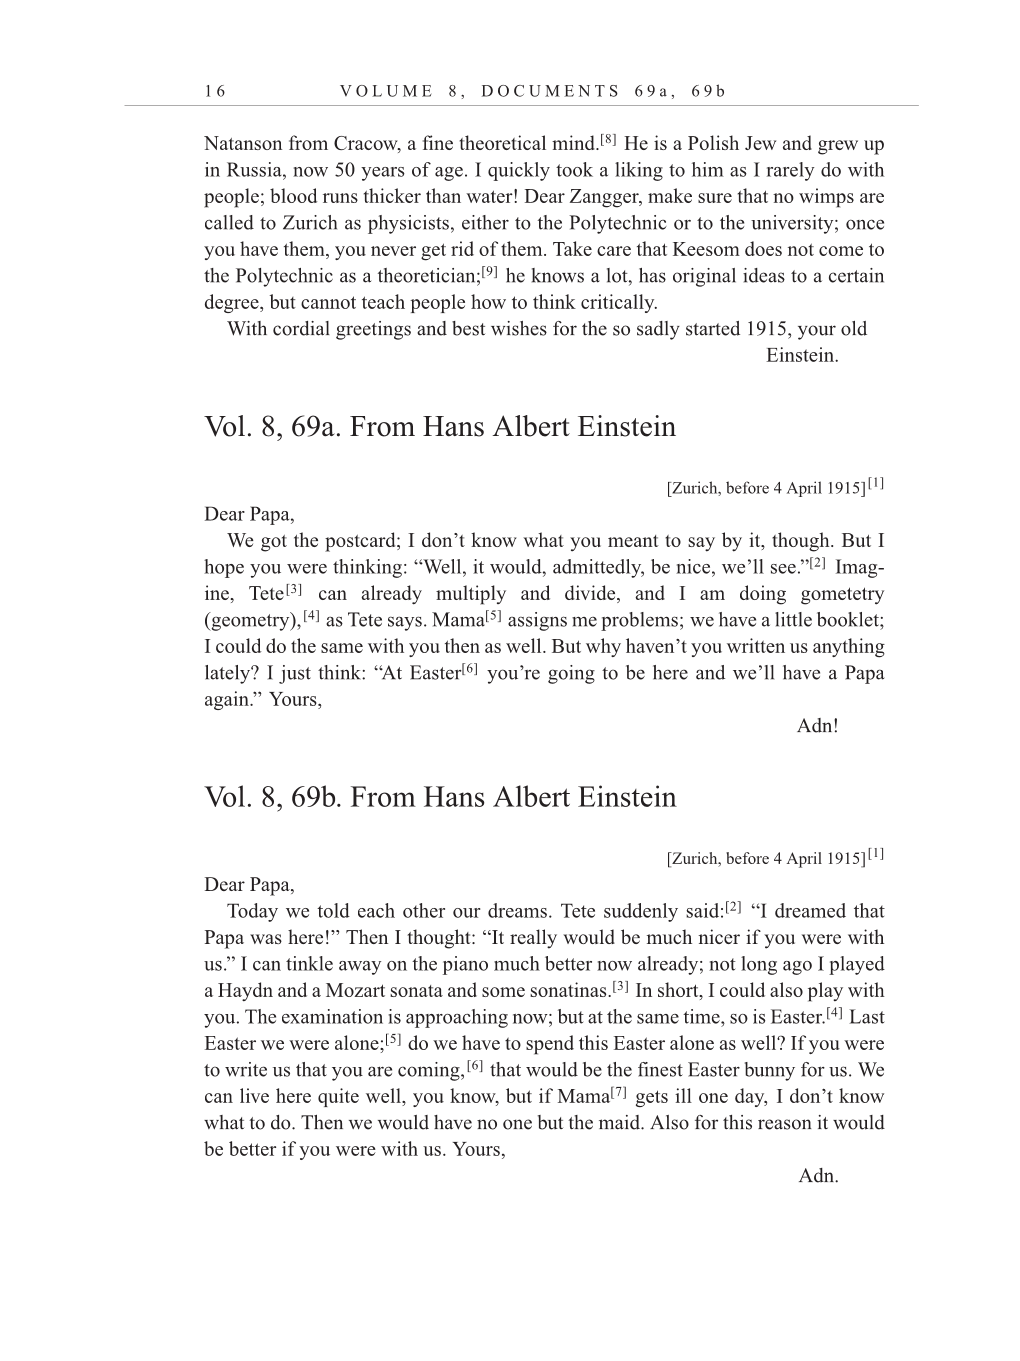 Volume 10: The Berlin Years: Correspondence, May-December 1920, and Supplementary Correspondence, 1909-1920 (English translation supplement) page 16